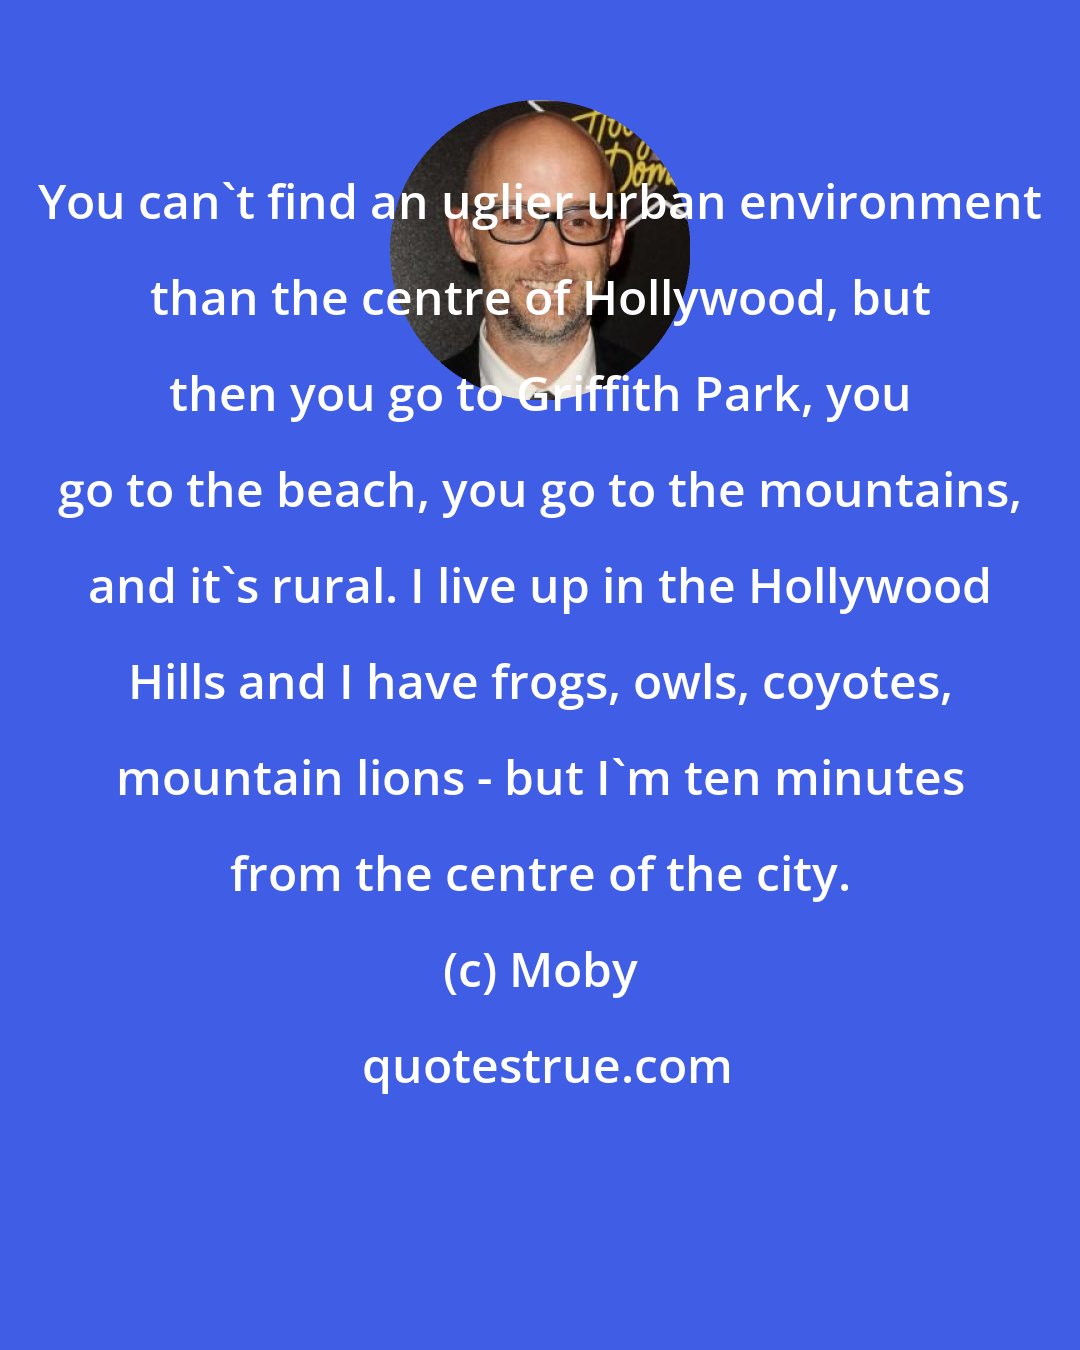 Moby: You can't find an uglier urban environment than the centre of Hollywood, but then you go to Griffith Park, you go to the beach, you go to the mountains, and it's rural. I live up in the Hollywood Hills and I have frogs, owls, coyotes, mountain lions - but I'm ten minutes from the centre of the city.